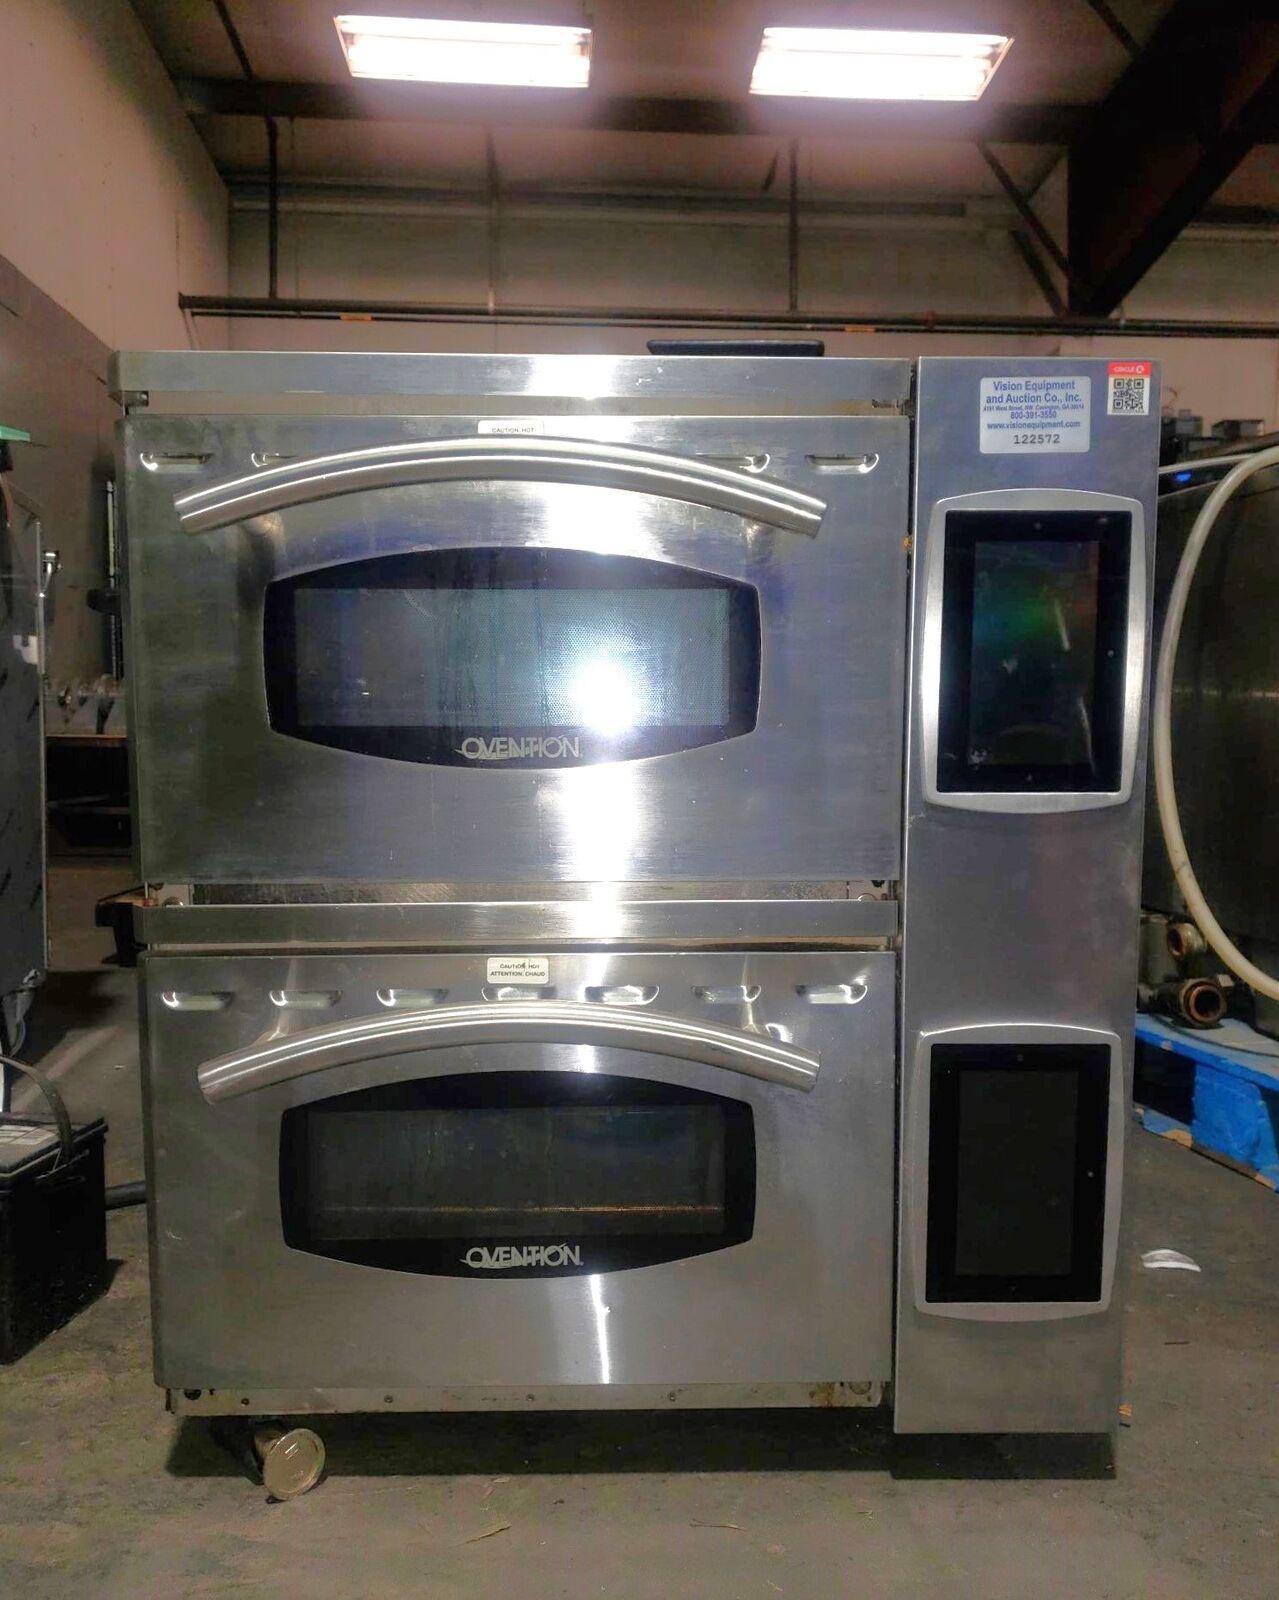 OVENTION MILO2-16-G2 DOUBLE STACK VENTLESS OVEN INFRARED CONVECTION (PARTS ONLY)